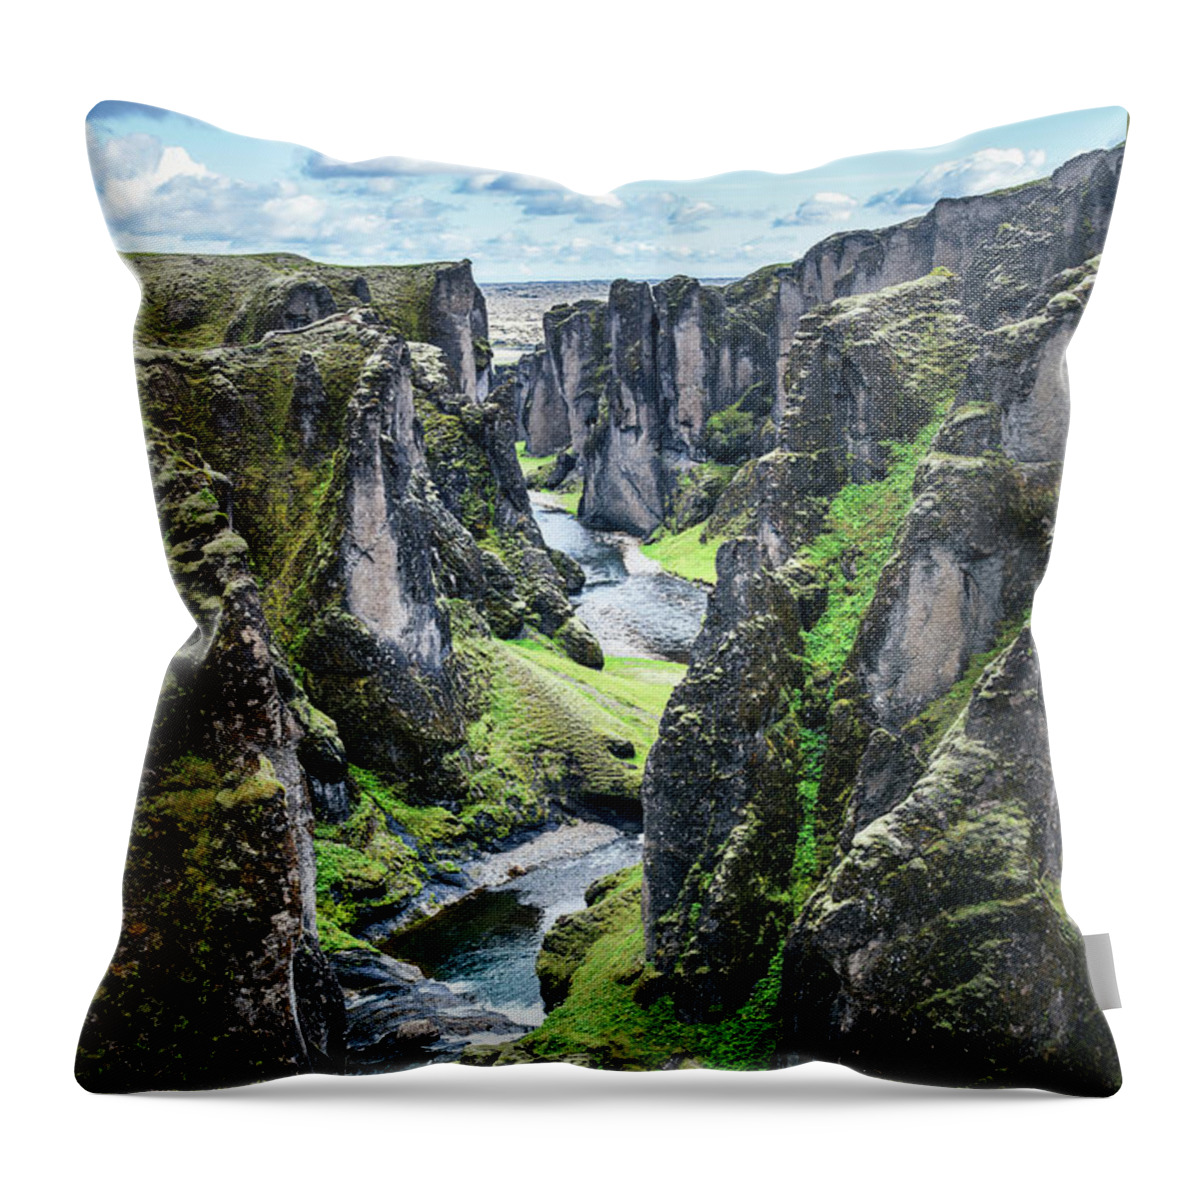 Iceland Throw Pillow featuring the photograph Fjadrargljufur canyon in Iceland by Delphimages Photo Creations